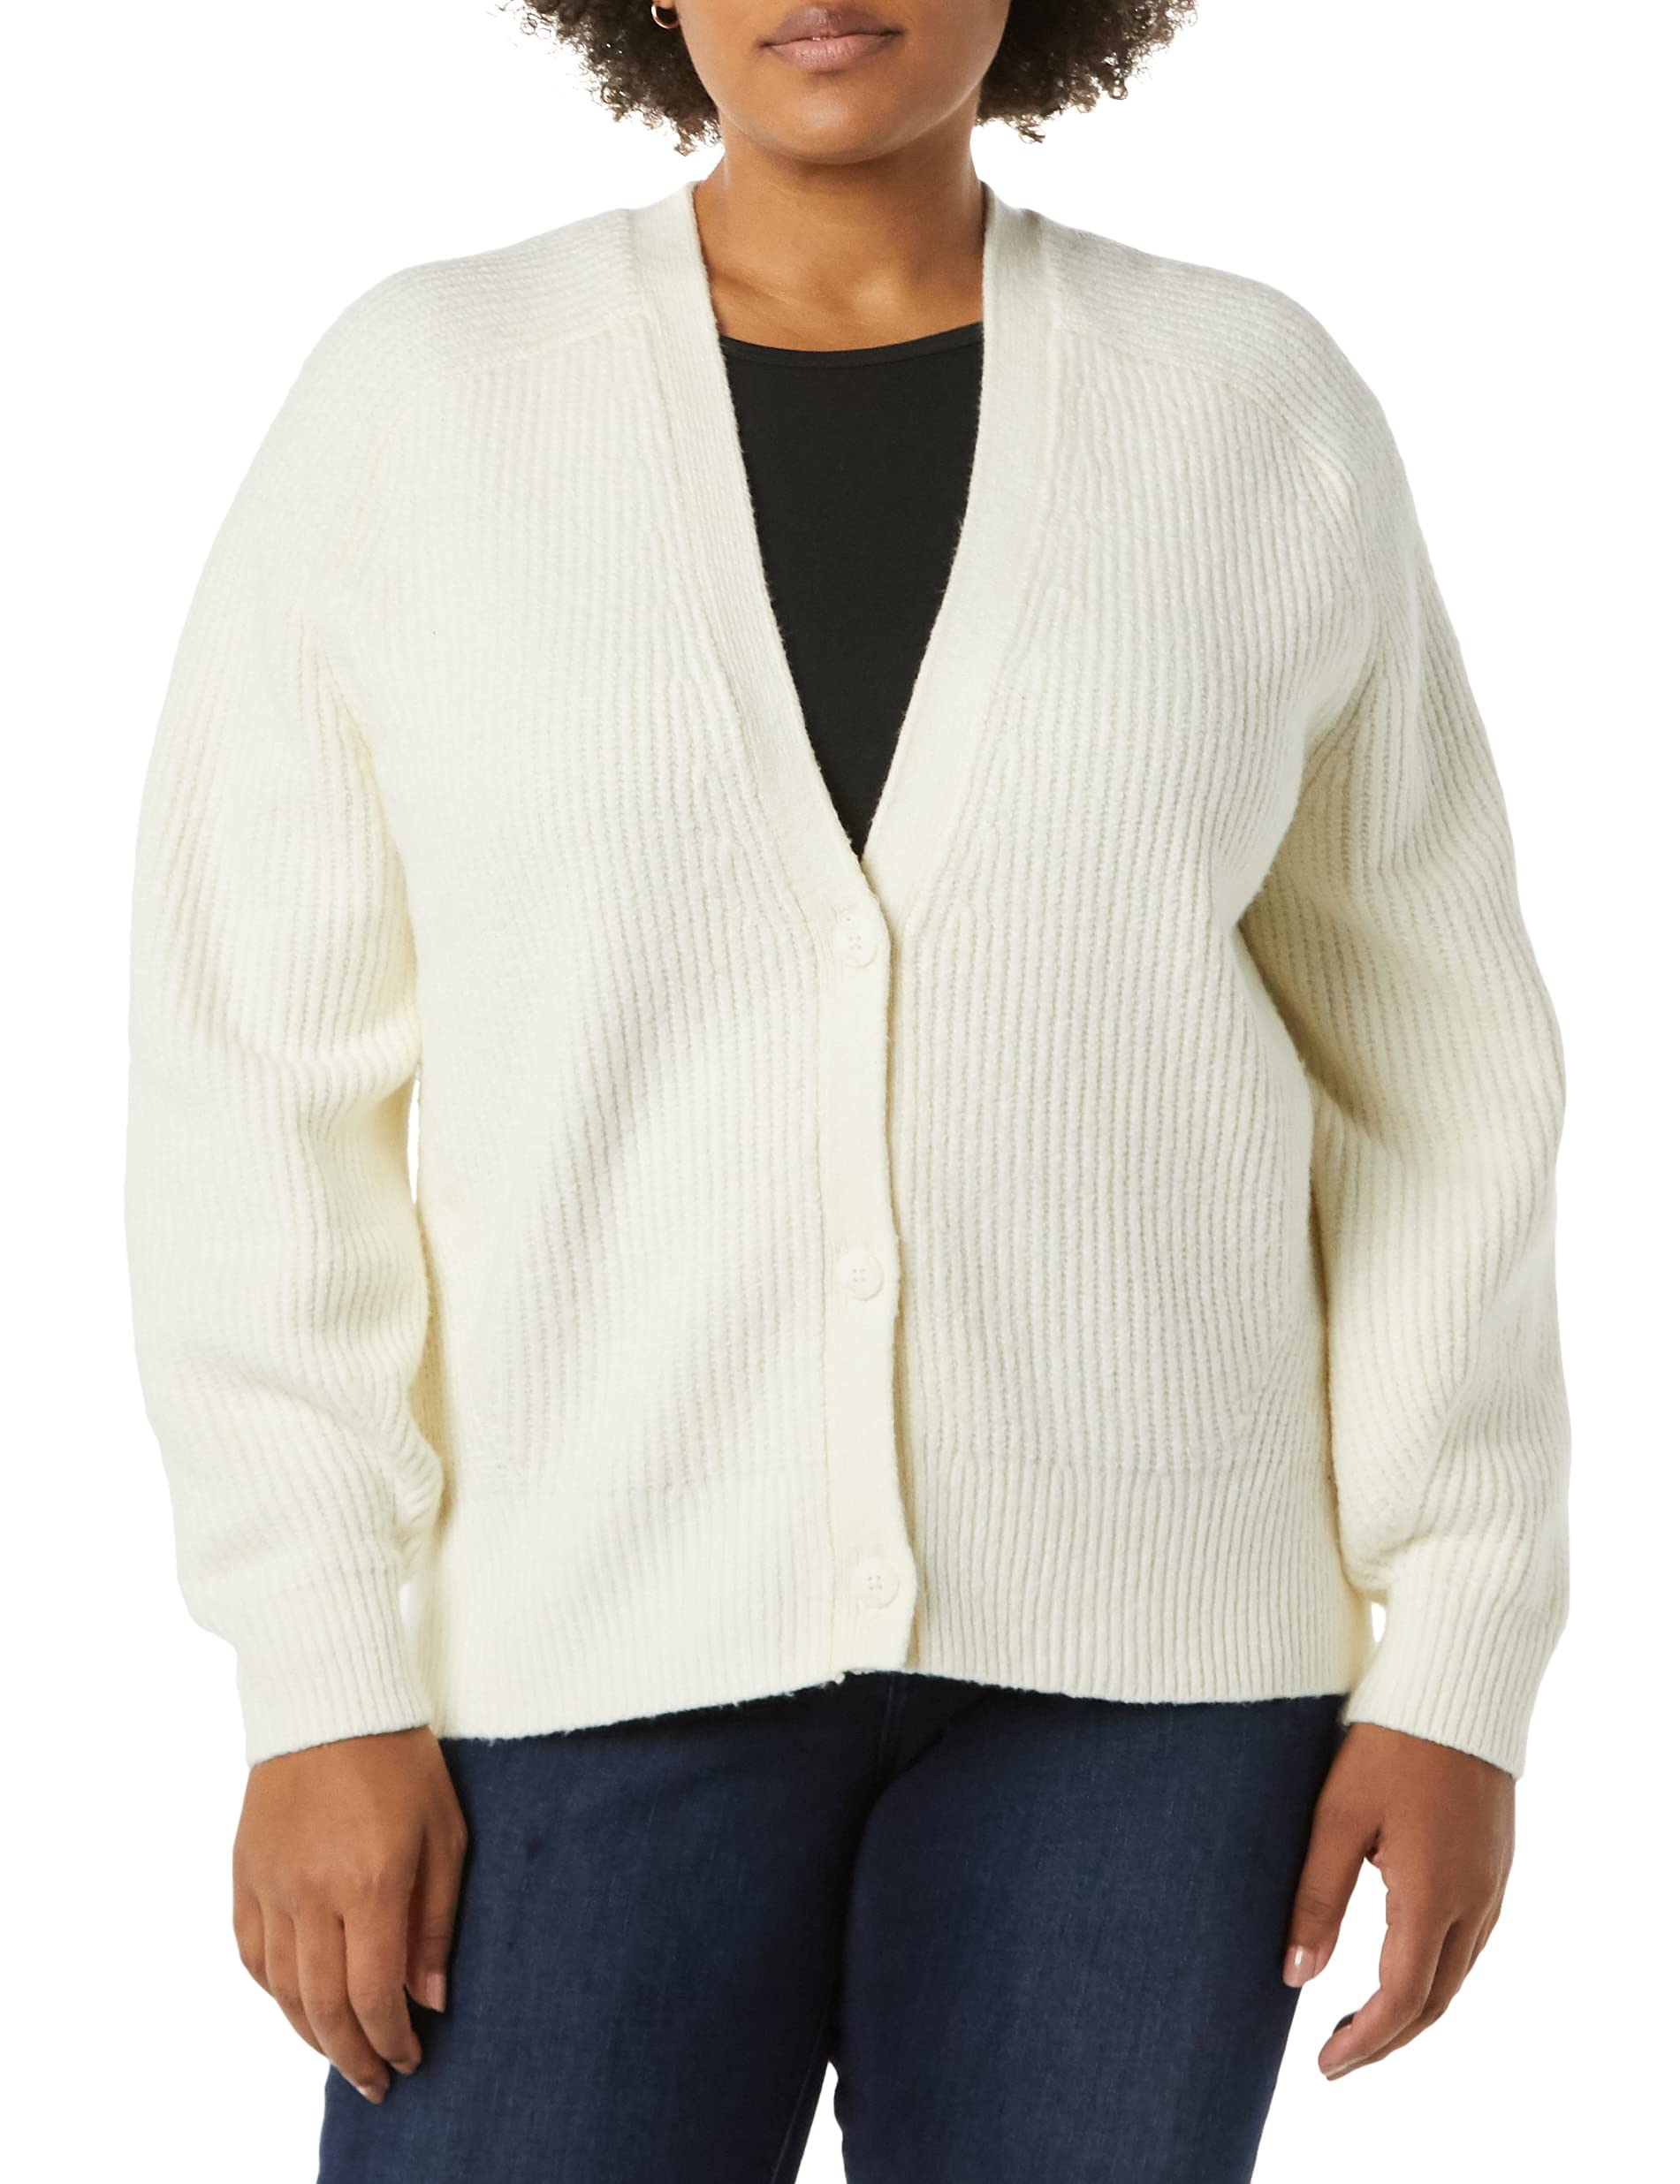 Amazon Essentials Women's Soft Touch Ribbed Blouson Cardigan